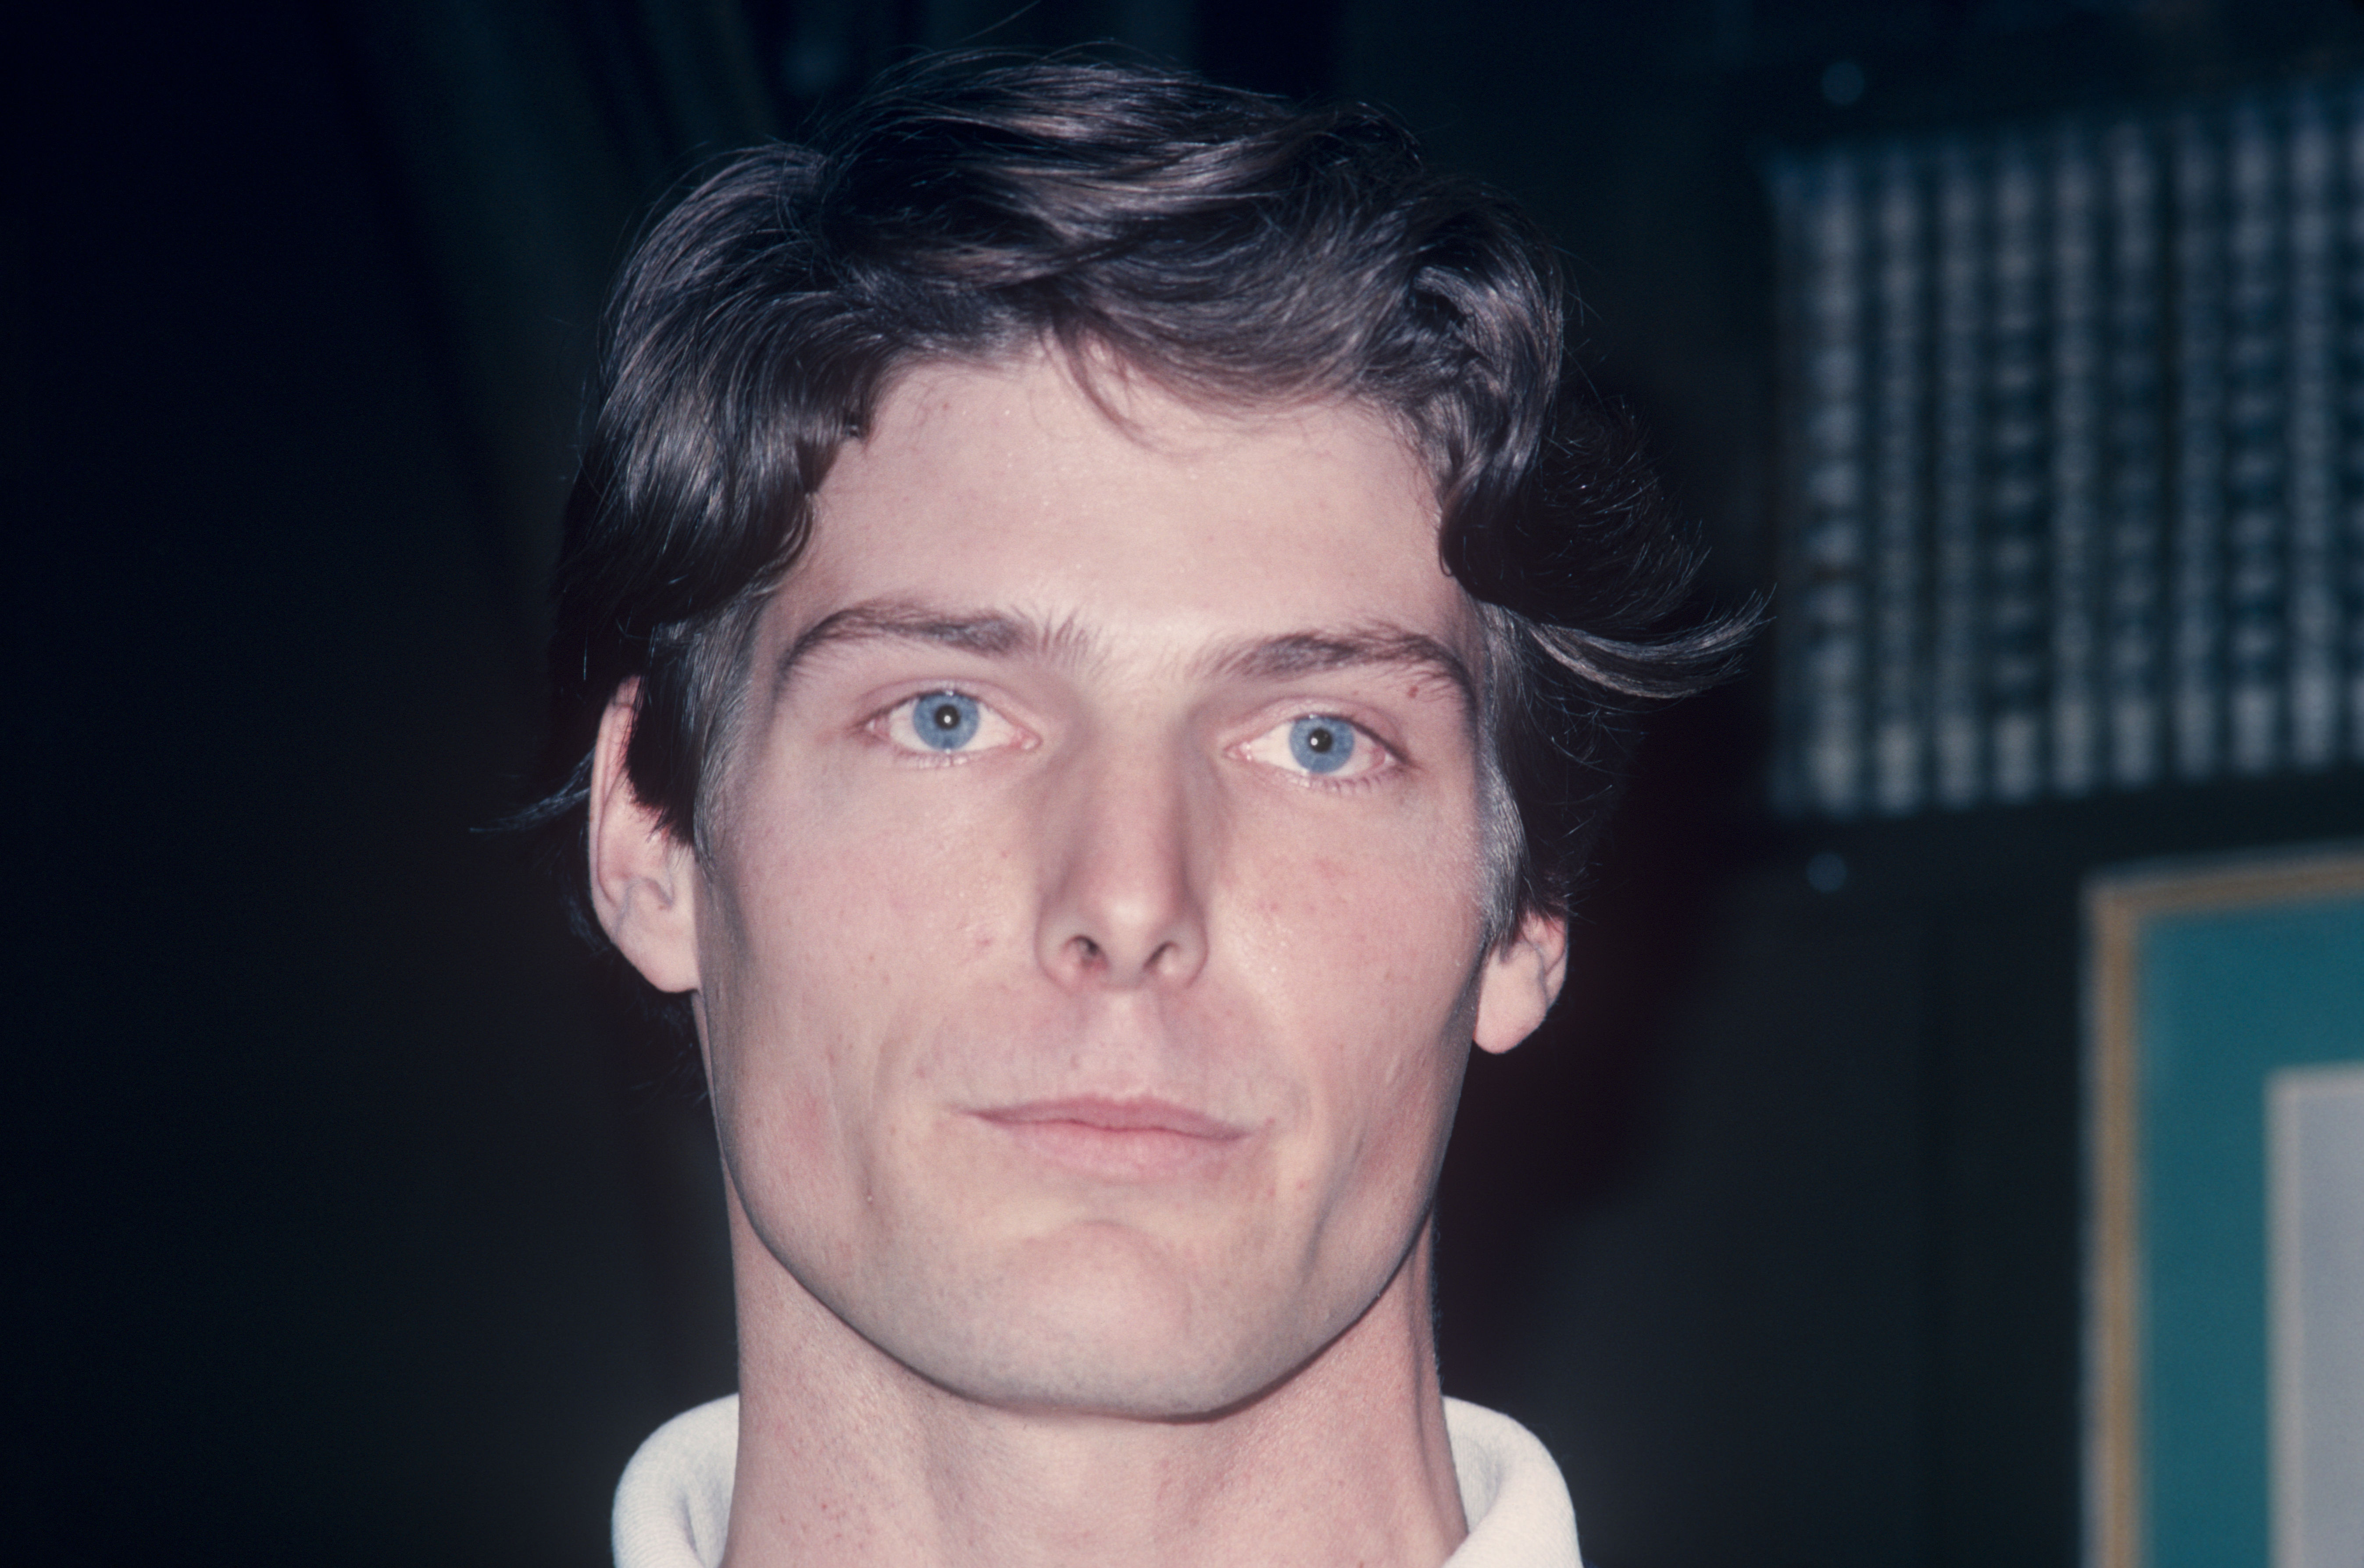 Christopher Reeve à New York, vers 1970 | Source : Getty Images